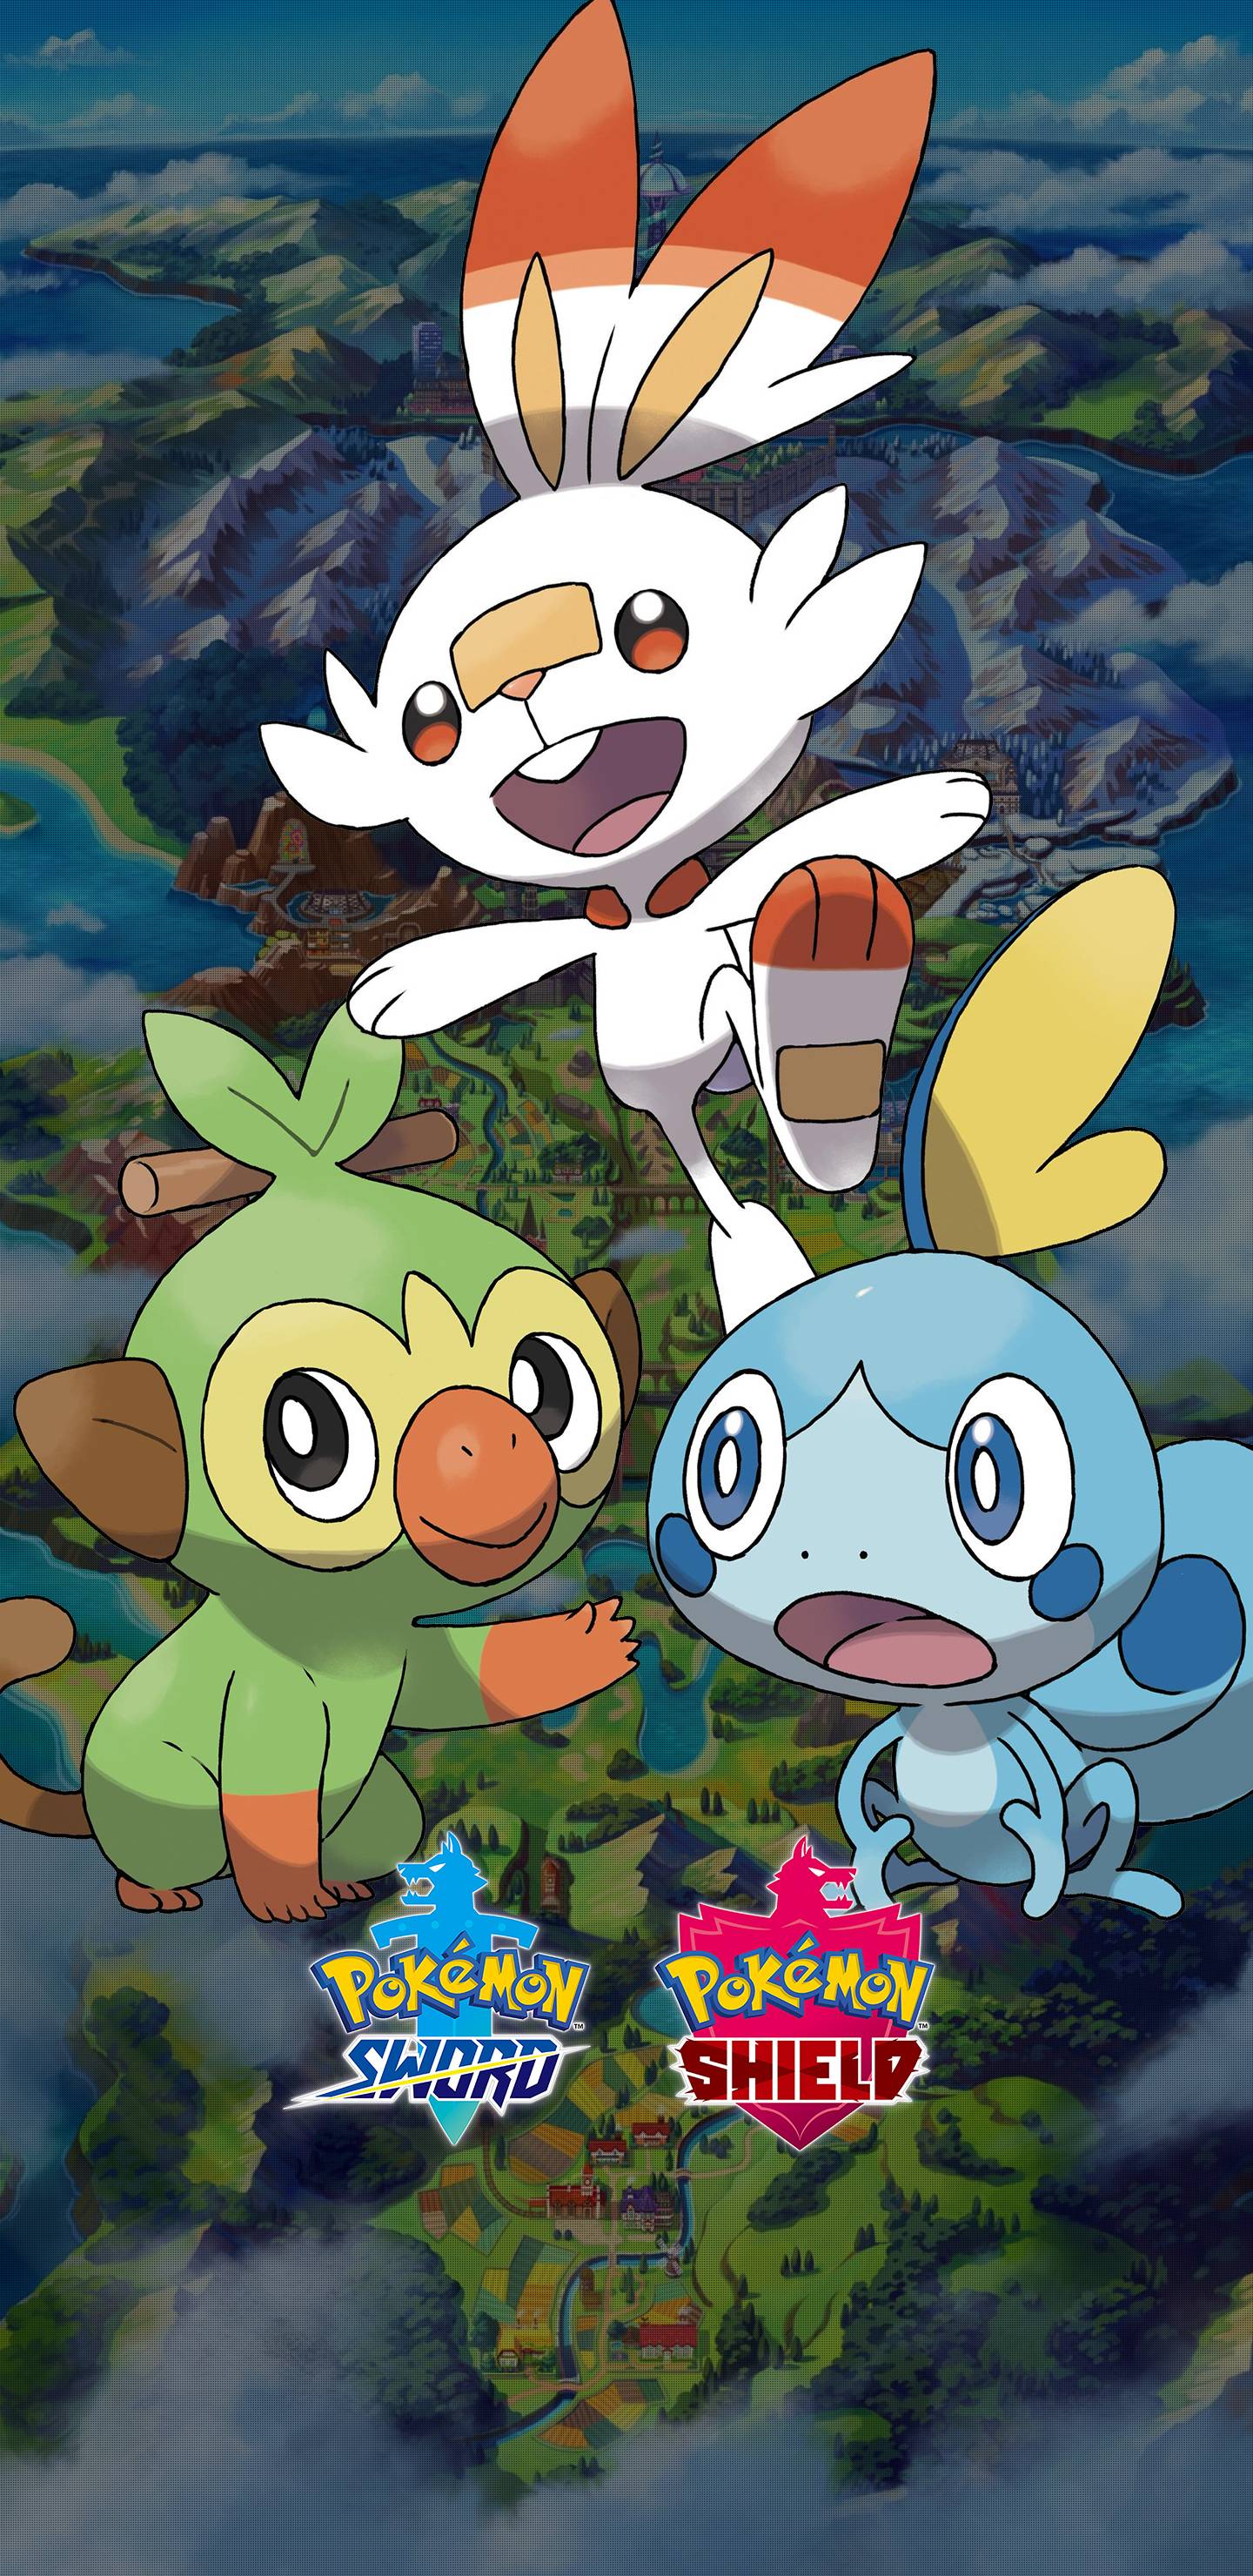 Pokemon Sword and Shield Starters Wallpaper. Cat with Monocle